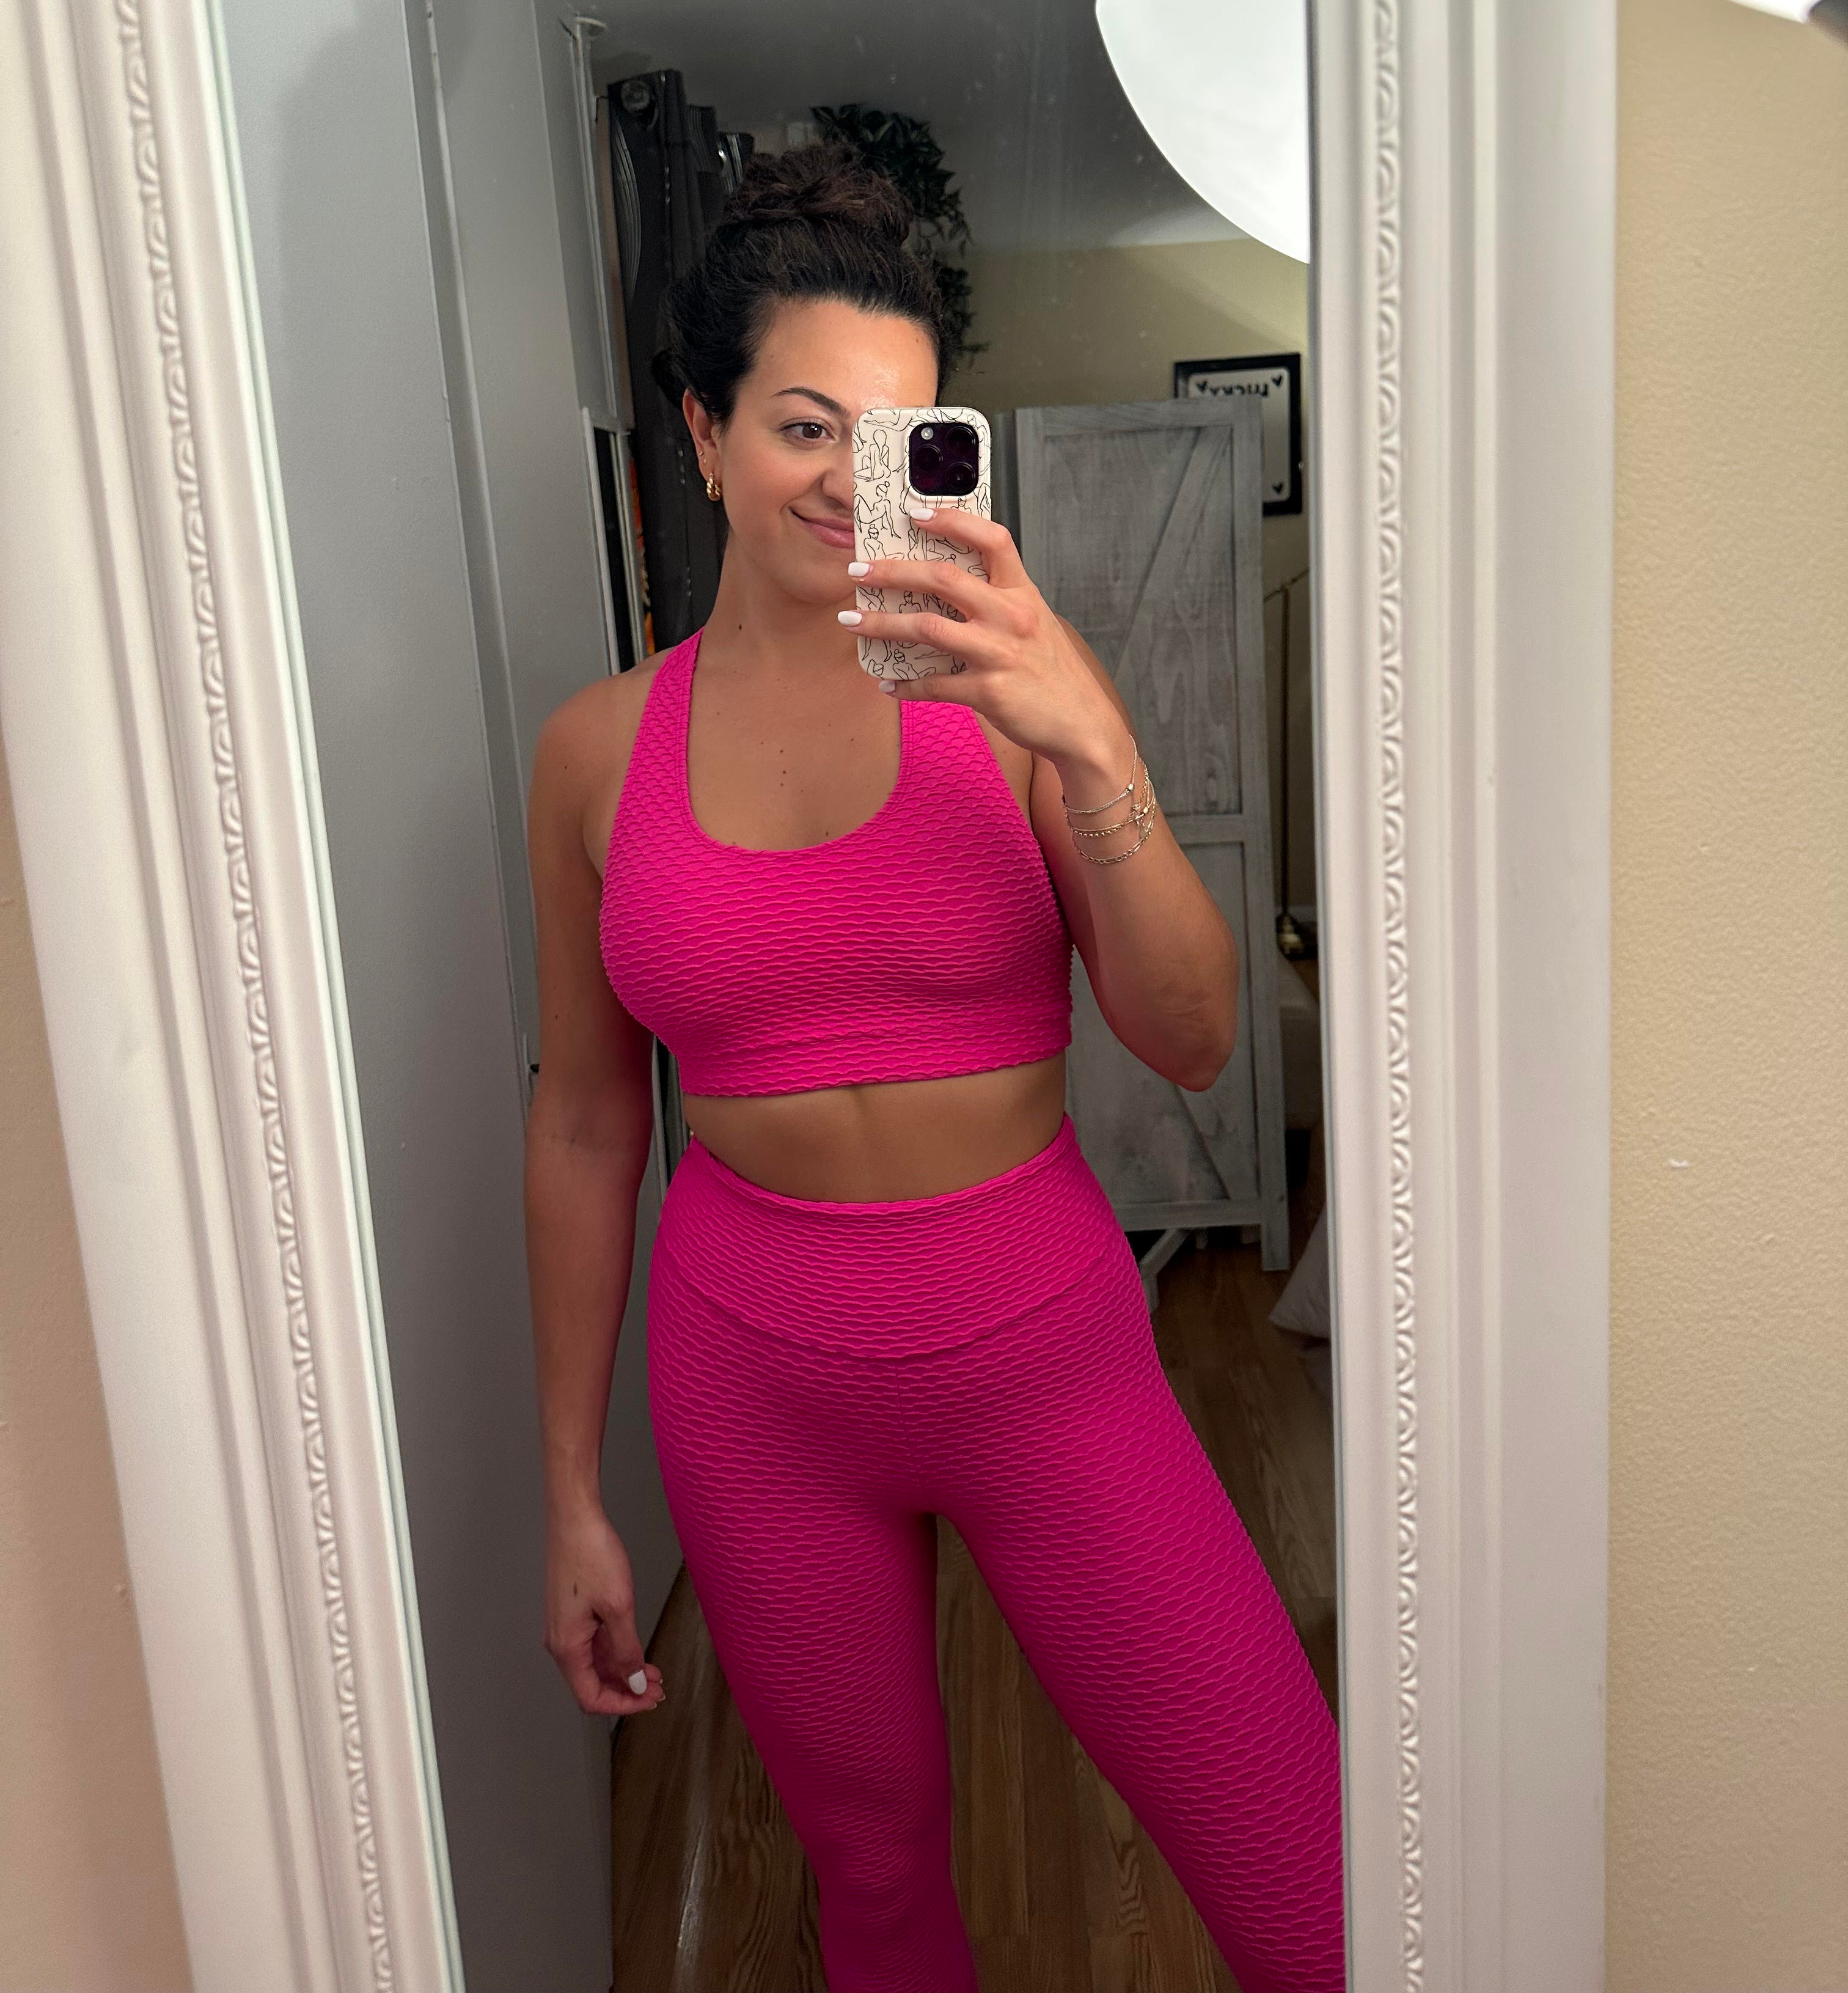 BuzzFeed writer wearing the bright pink sports bra and leggings set